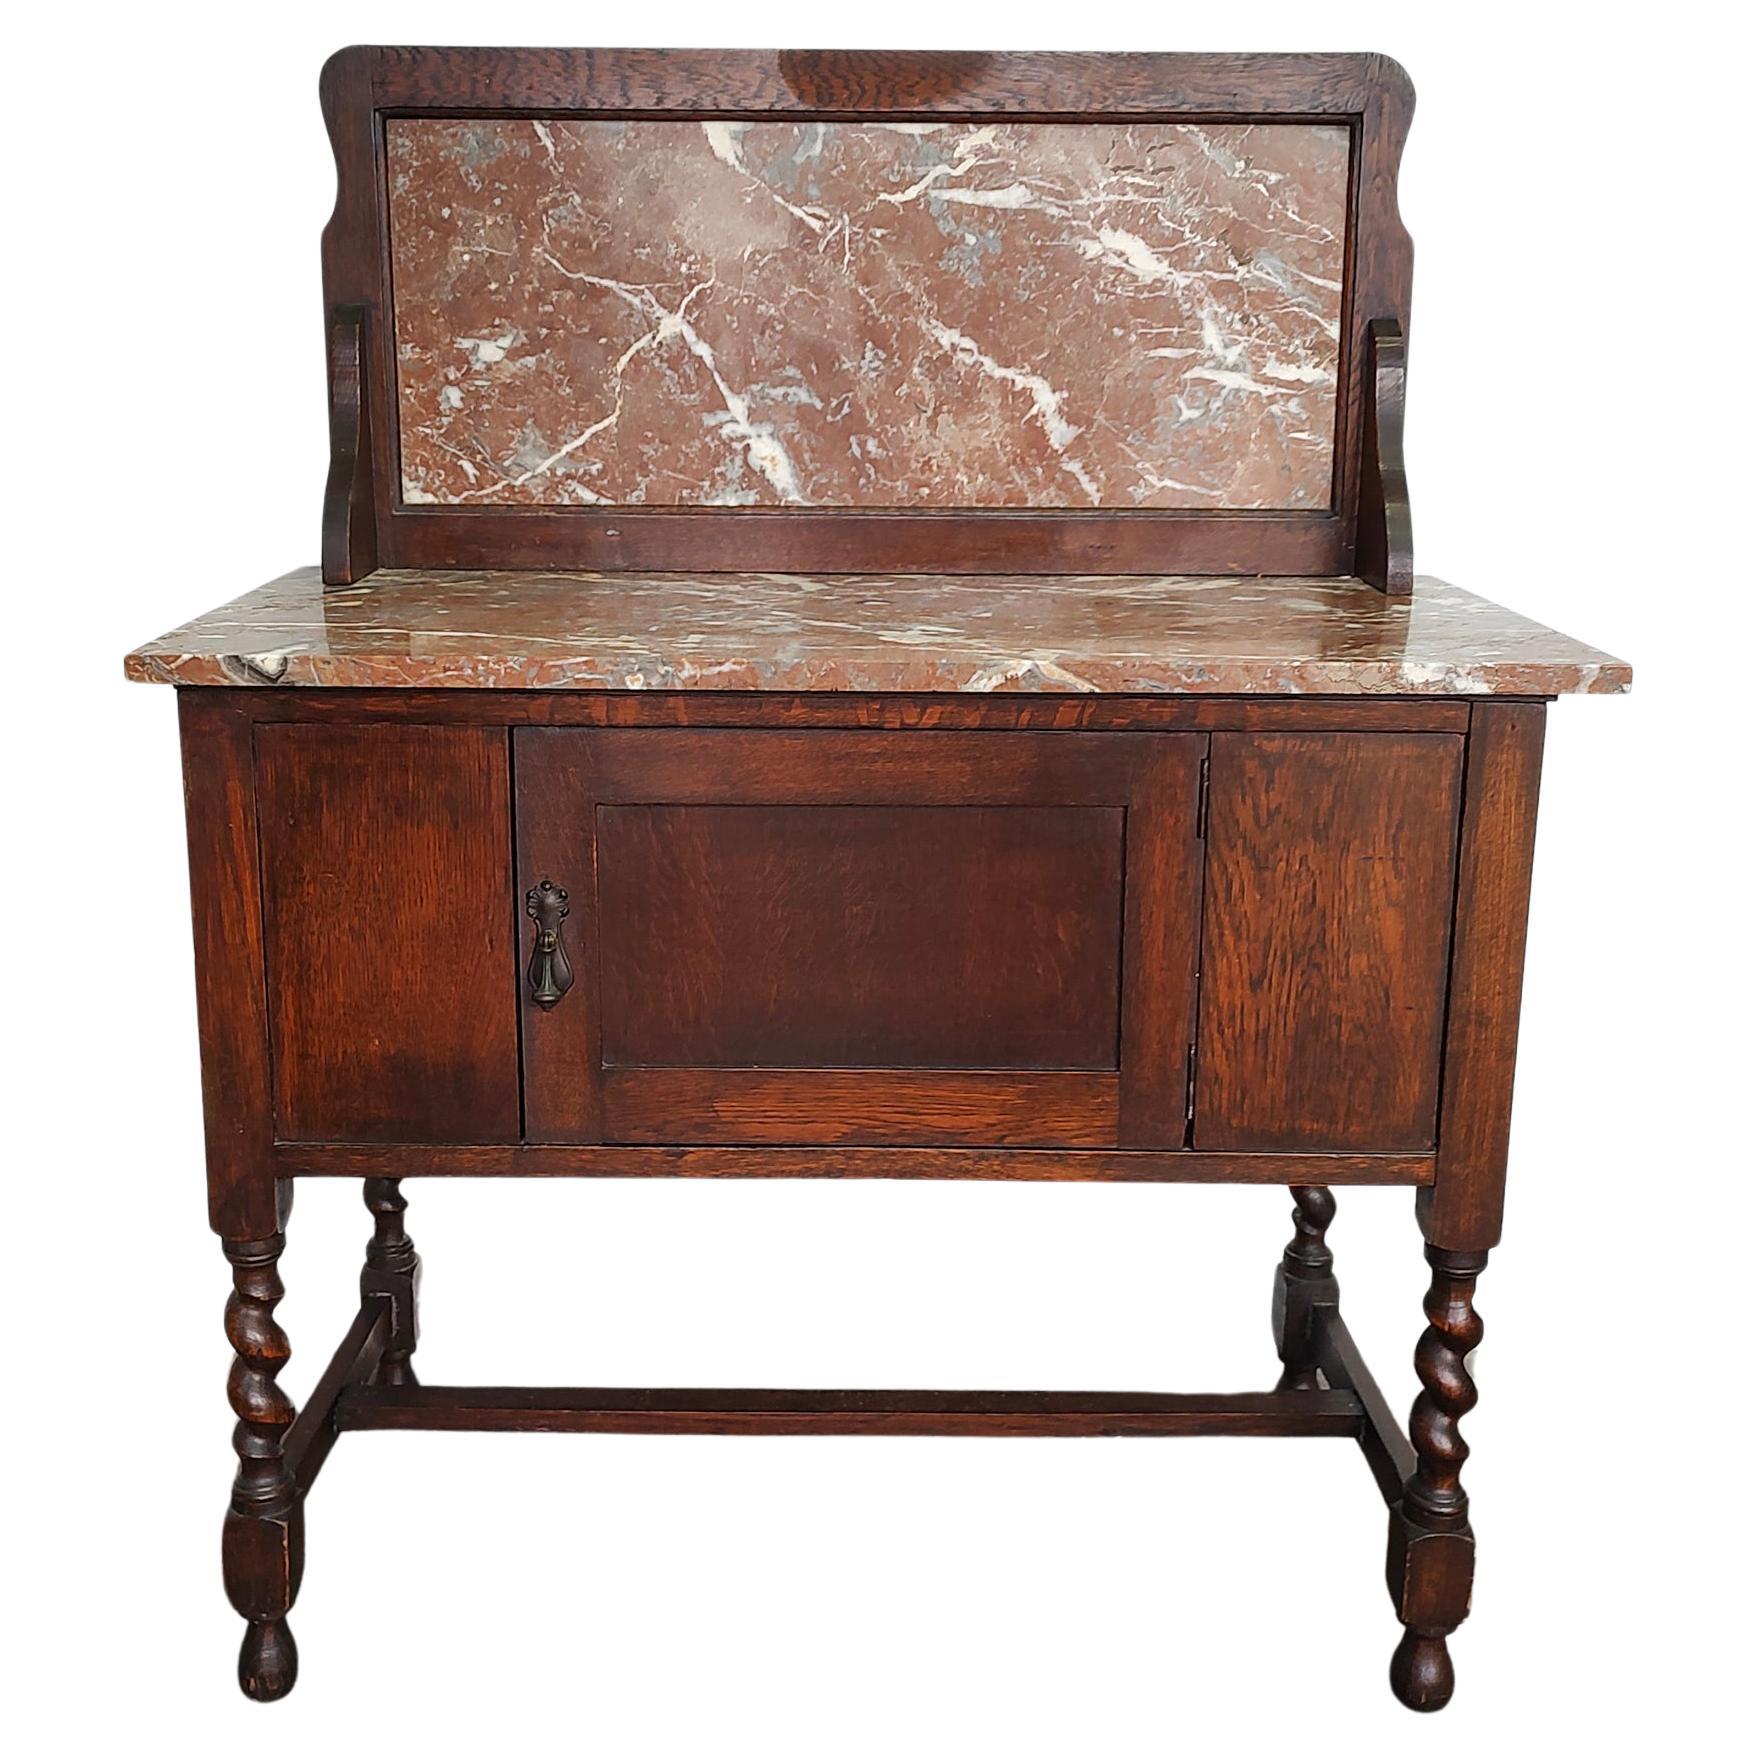 Early 20th-Century Antique Oak and Pink Stone Wash Stand Cabinet For Sale